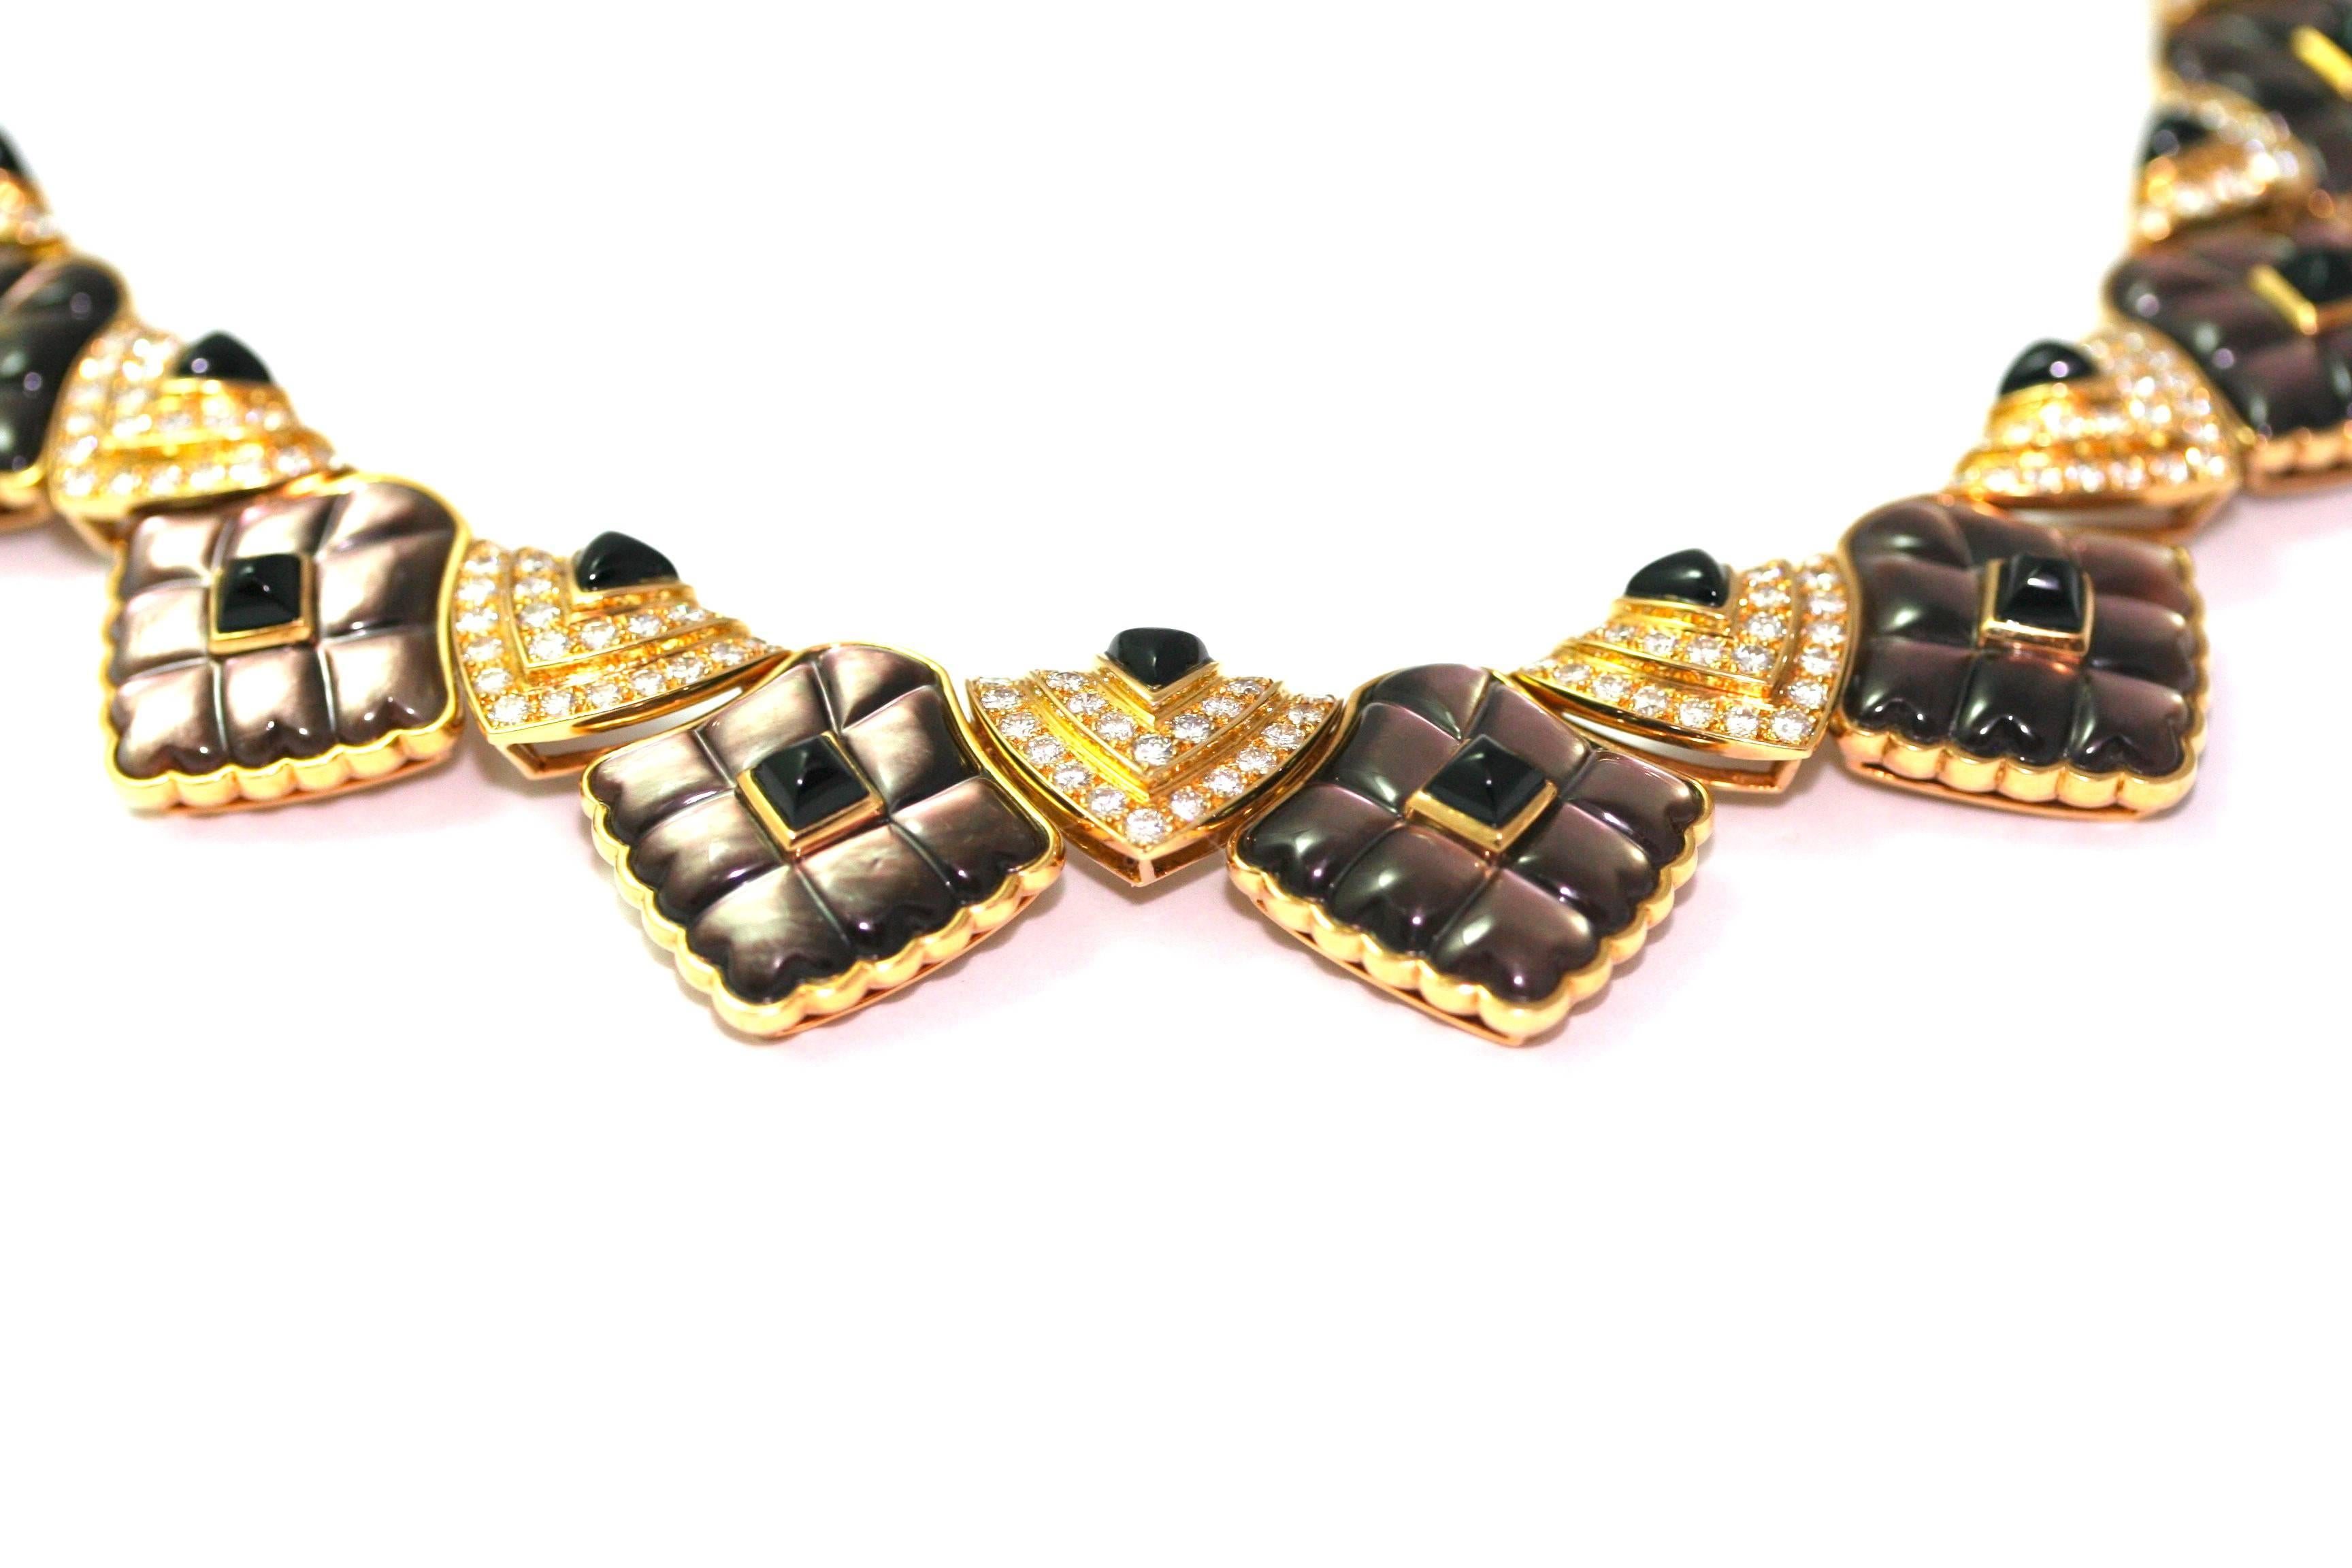 Rare Mauboussin Necklace made in the 70' - 80'. 
This necklace consists of different geometric shapes.
14 triangular motifs set with diamonds and sugarloaf onyx, the 5 central motifs are larger, with two rows of diamonds instead of one.
The rest of